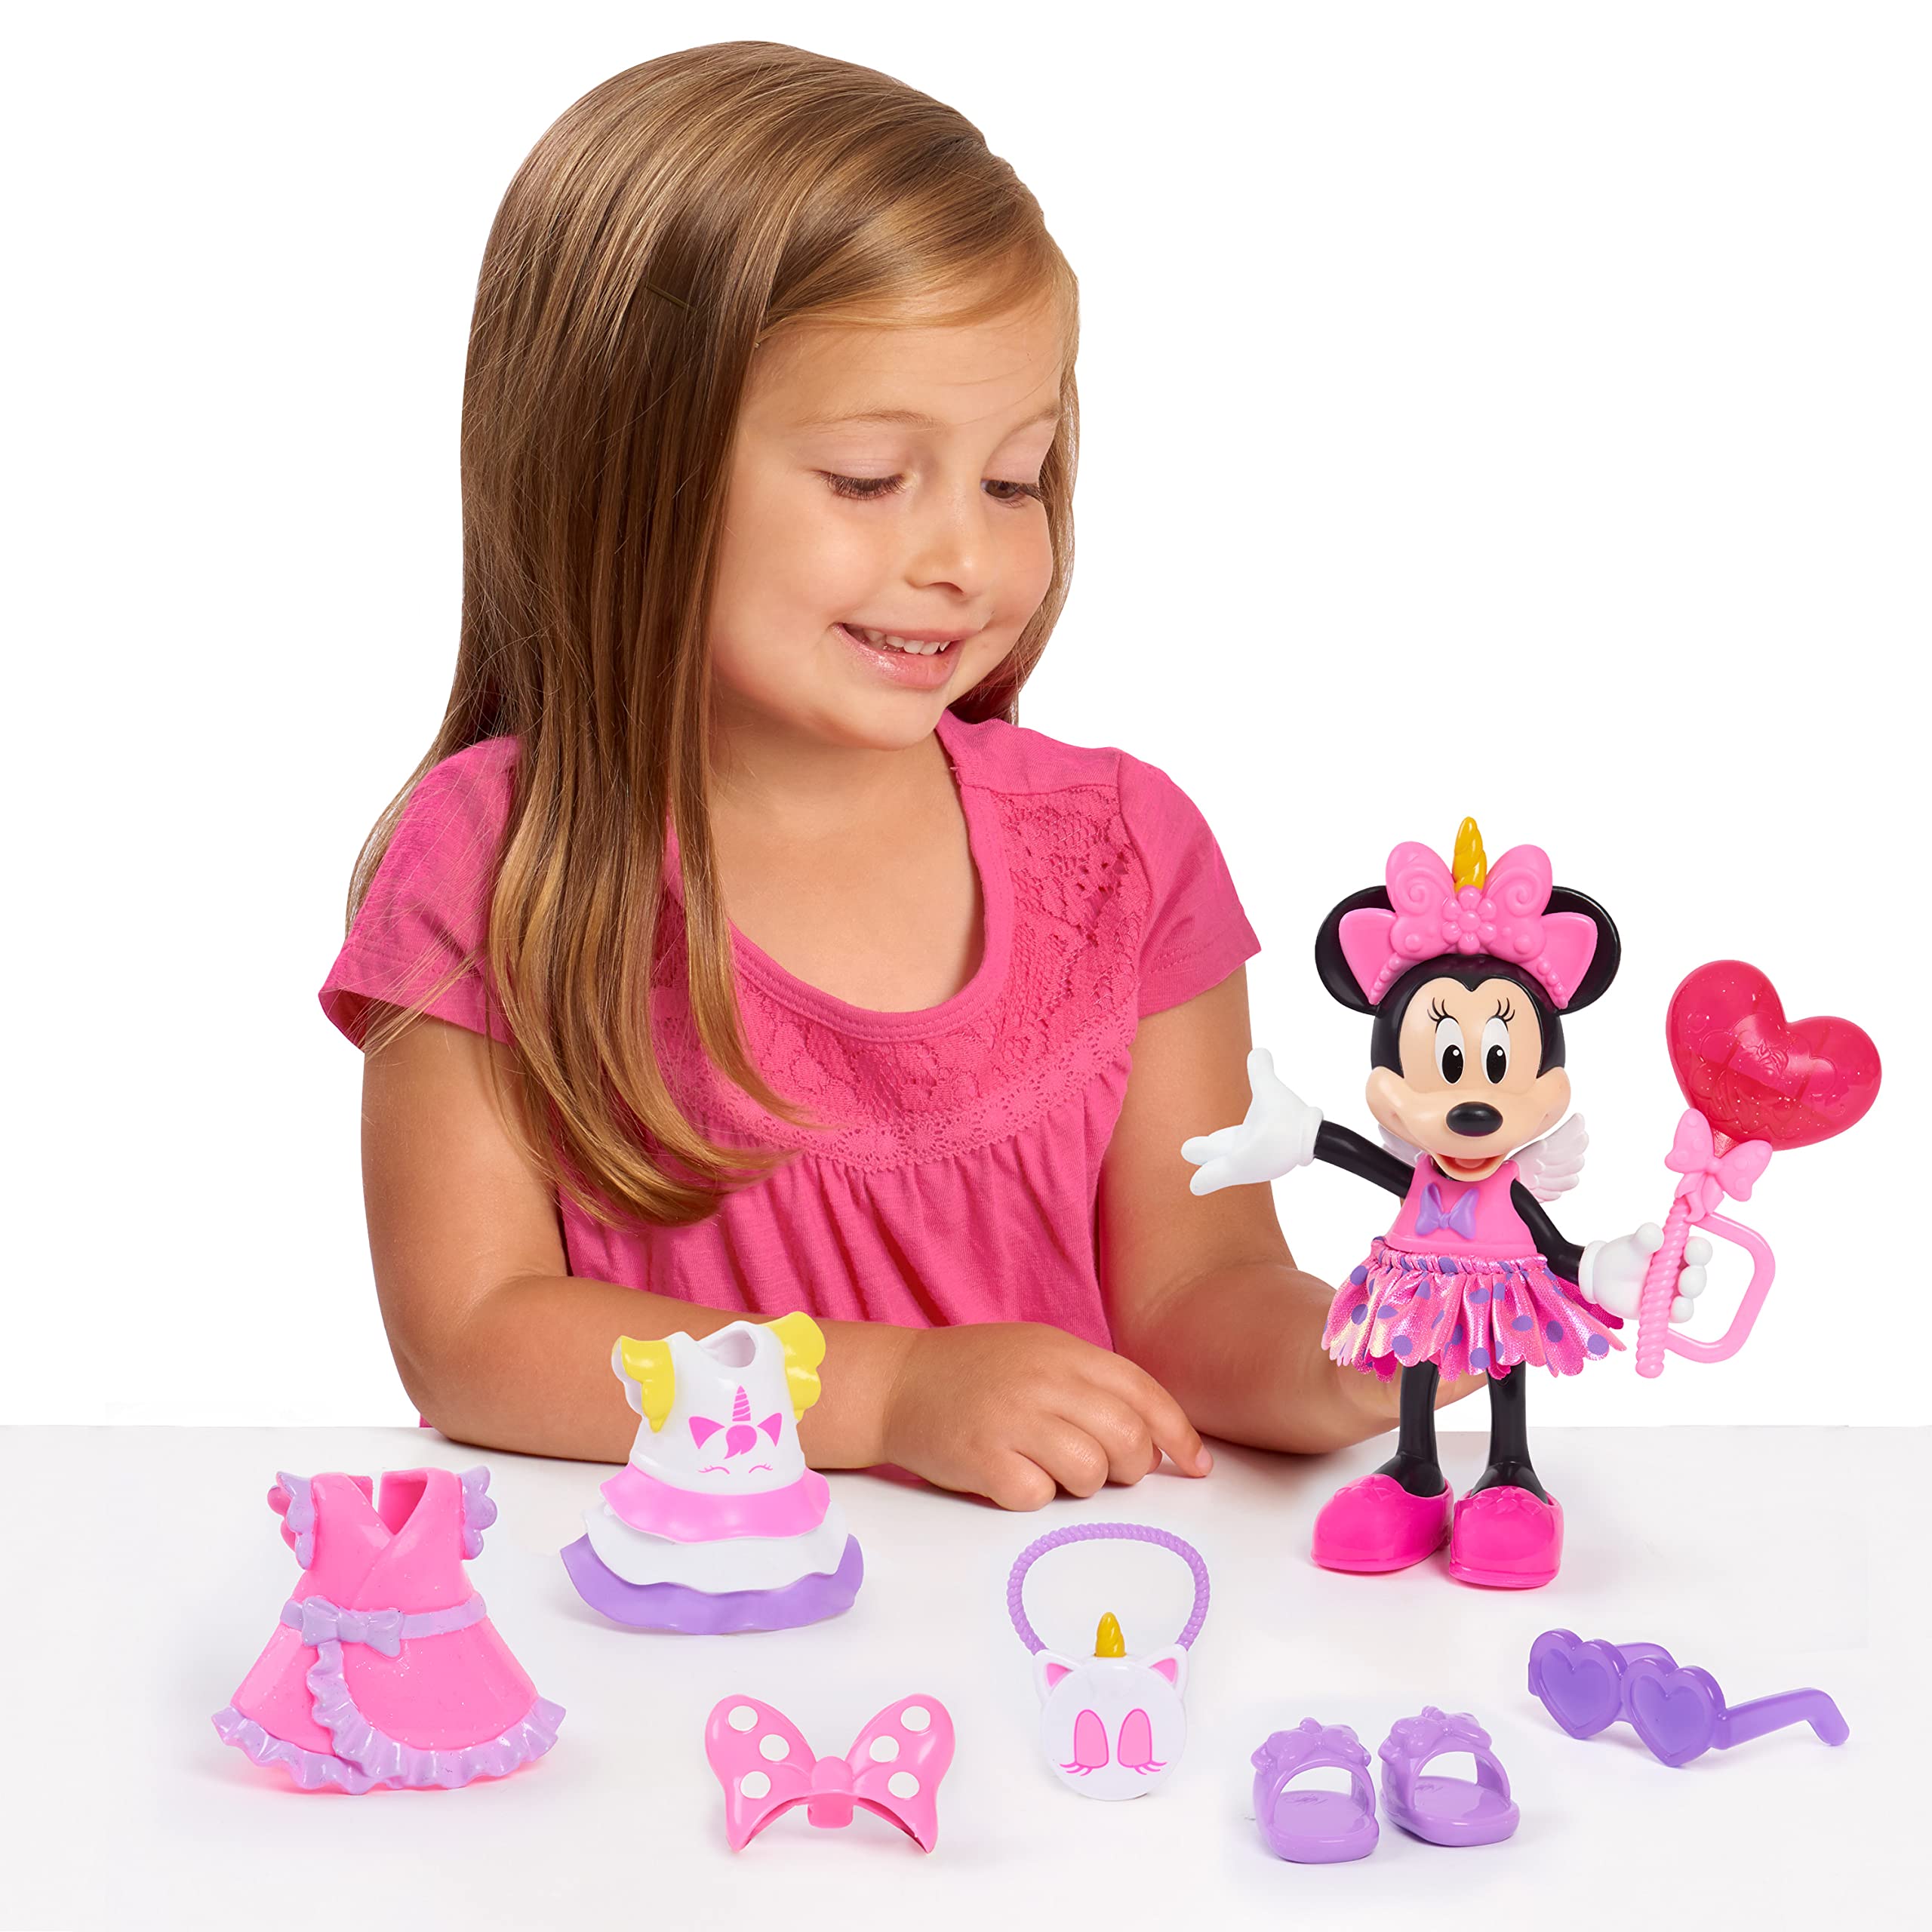 Minnie Mouse Fabulous Fashion Doll Unicorn Fantasy, Officially Licensed Kids Toys for Ages 3 Up, Gifts and Presents by Just Play